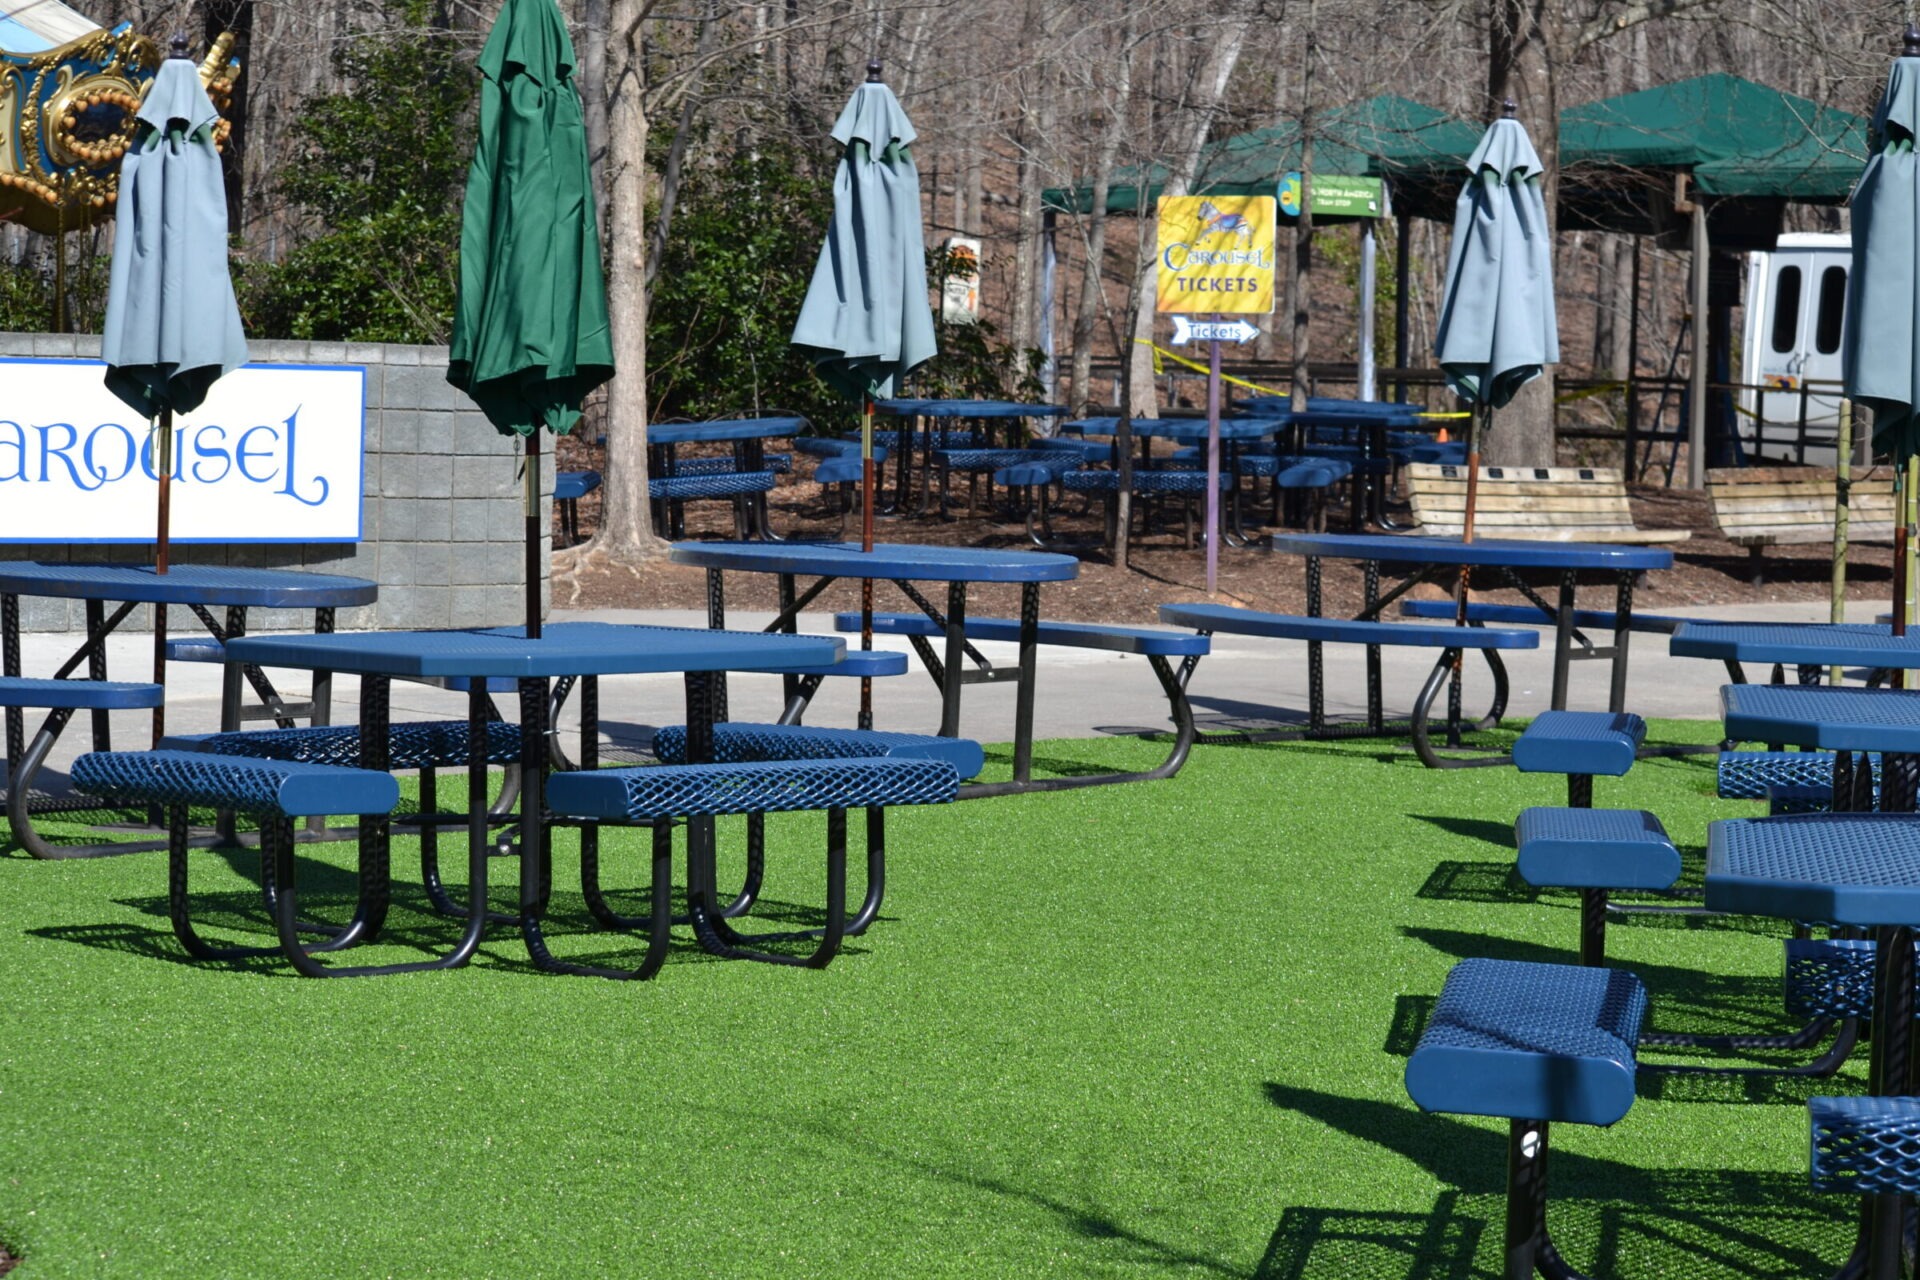 The image shows an outdoor seating area with blue picnic tables, closed green umbrellas, artificial grass, and signage for a carousel and tickets.